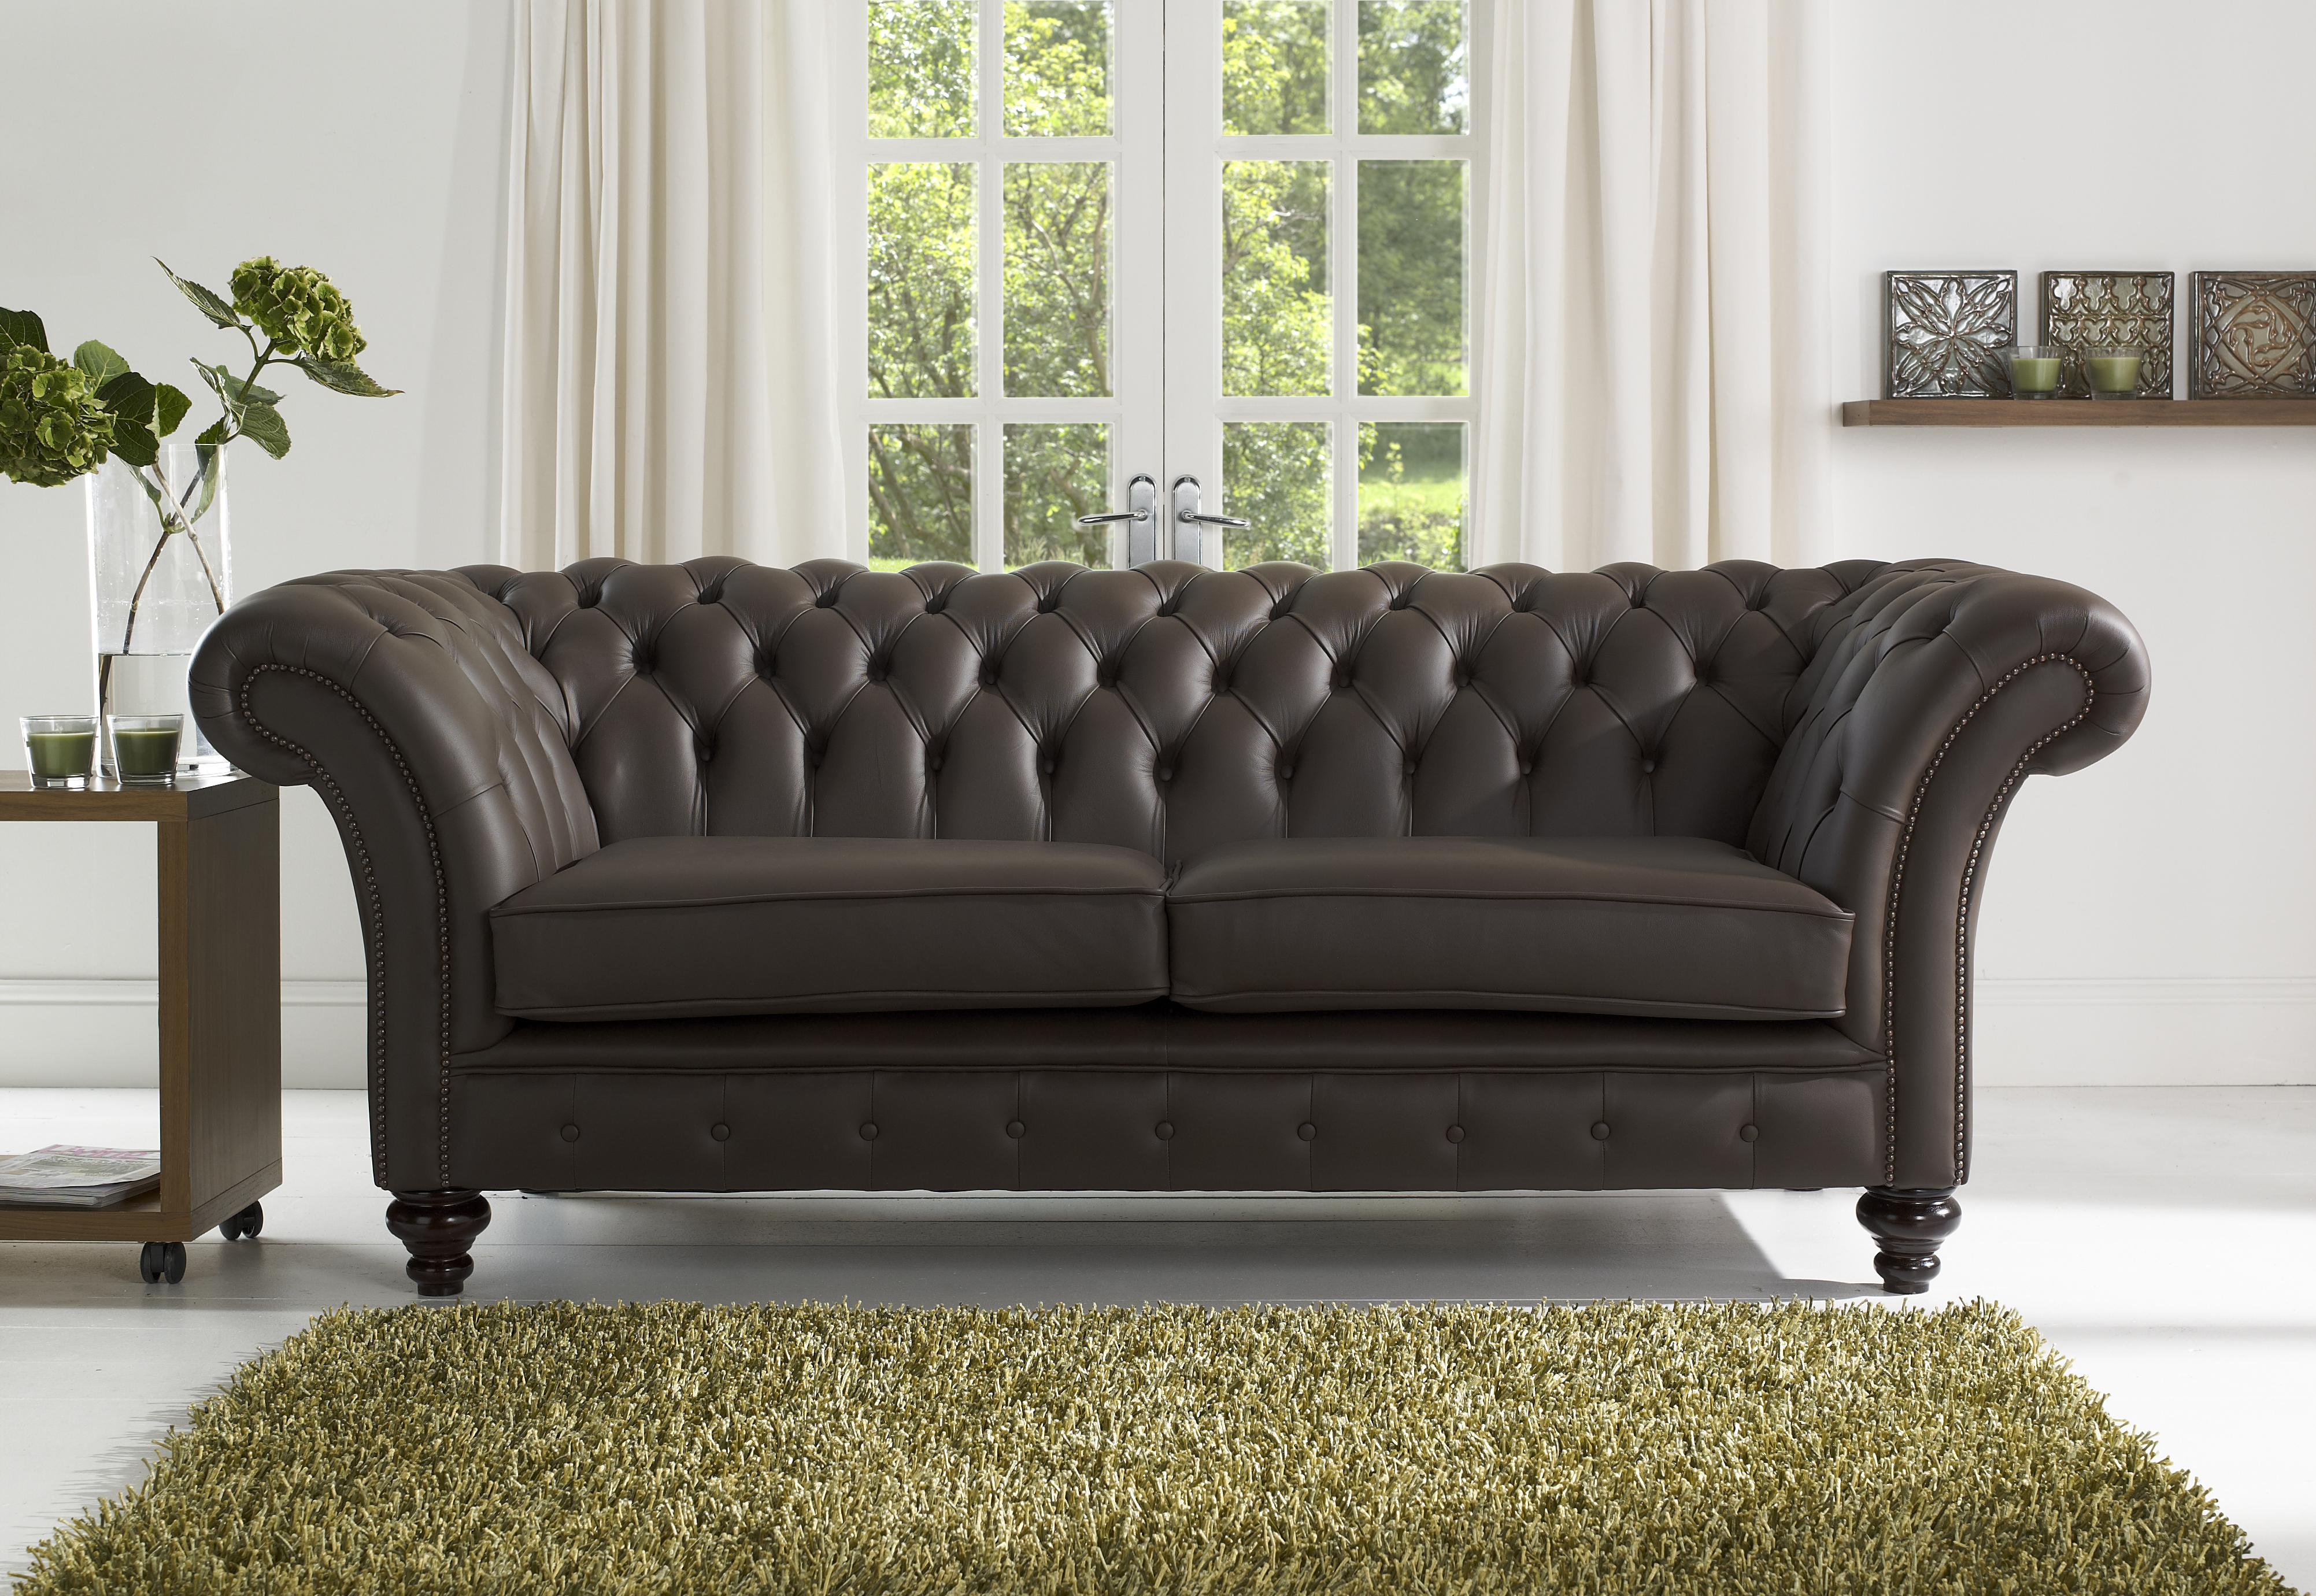 London Chesterfield English Chesterfields